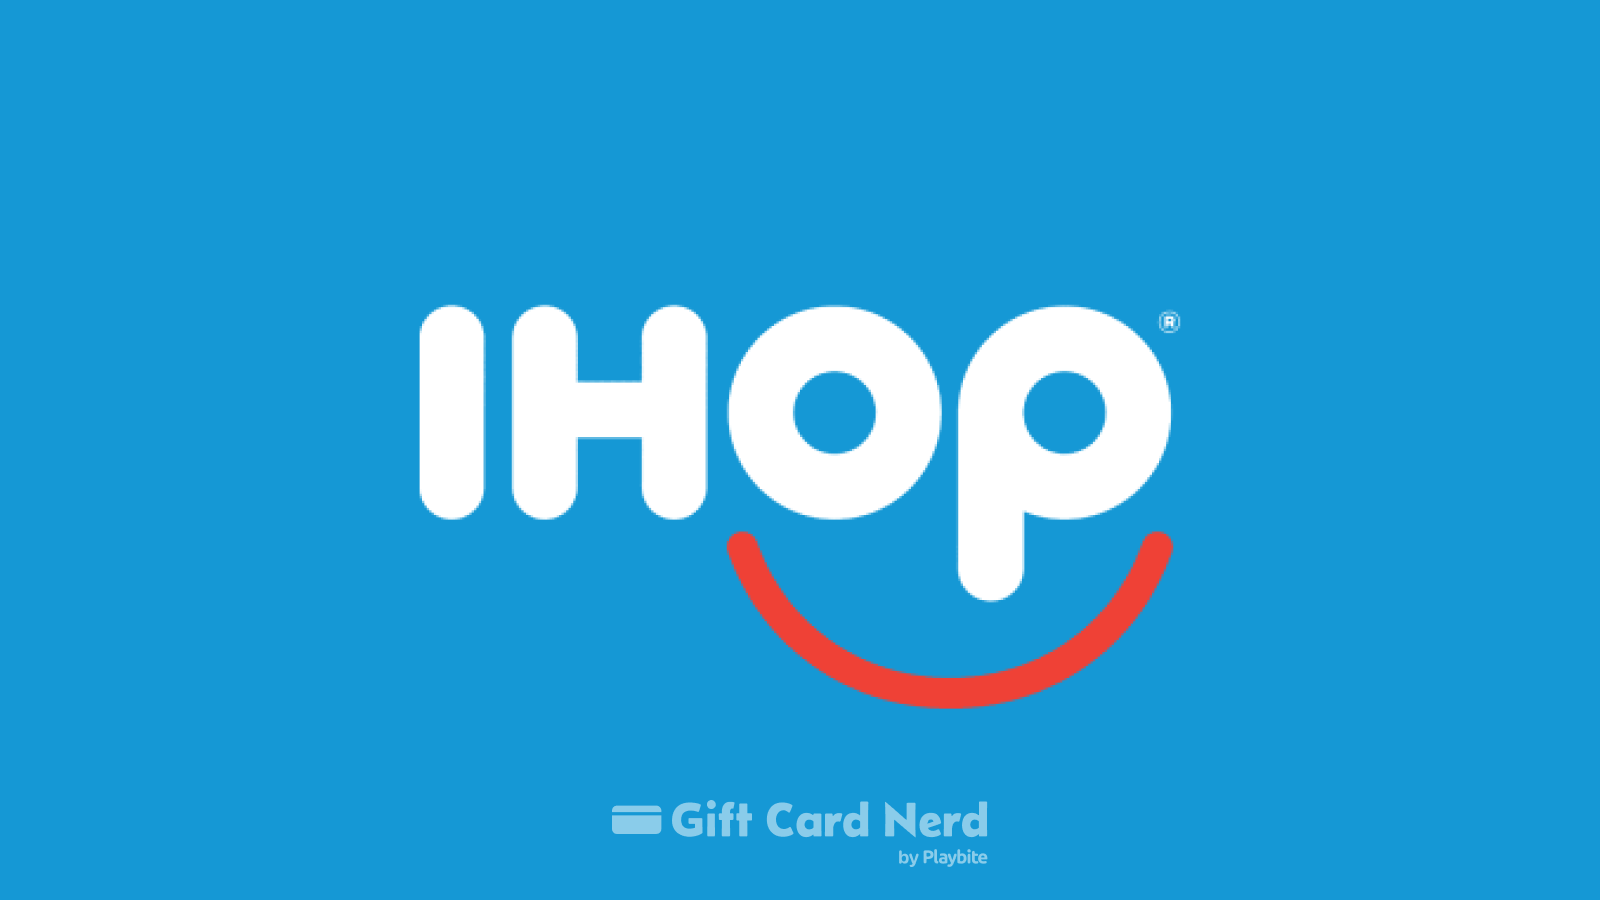 Can I Use an IHOP Gift Card on Amazon?